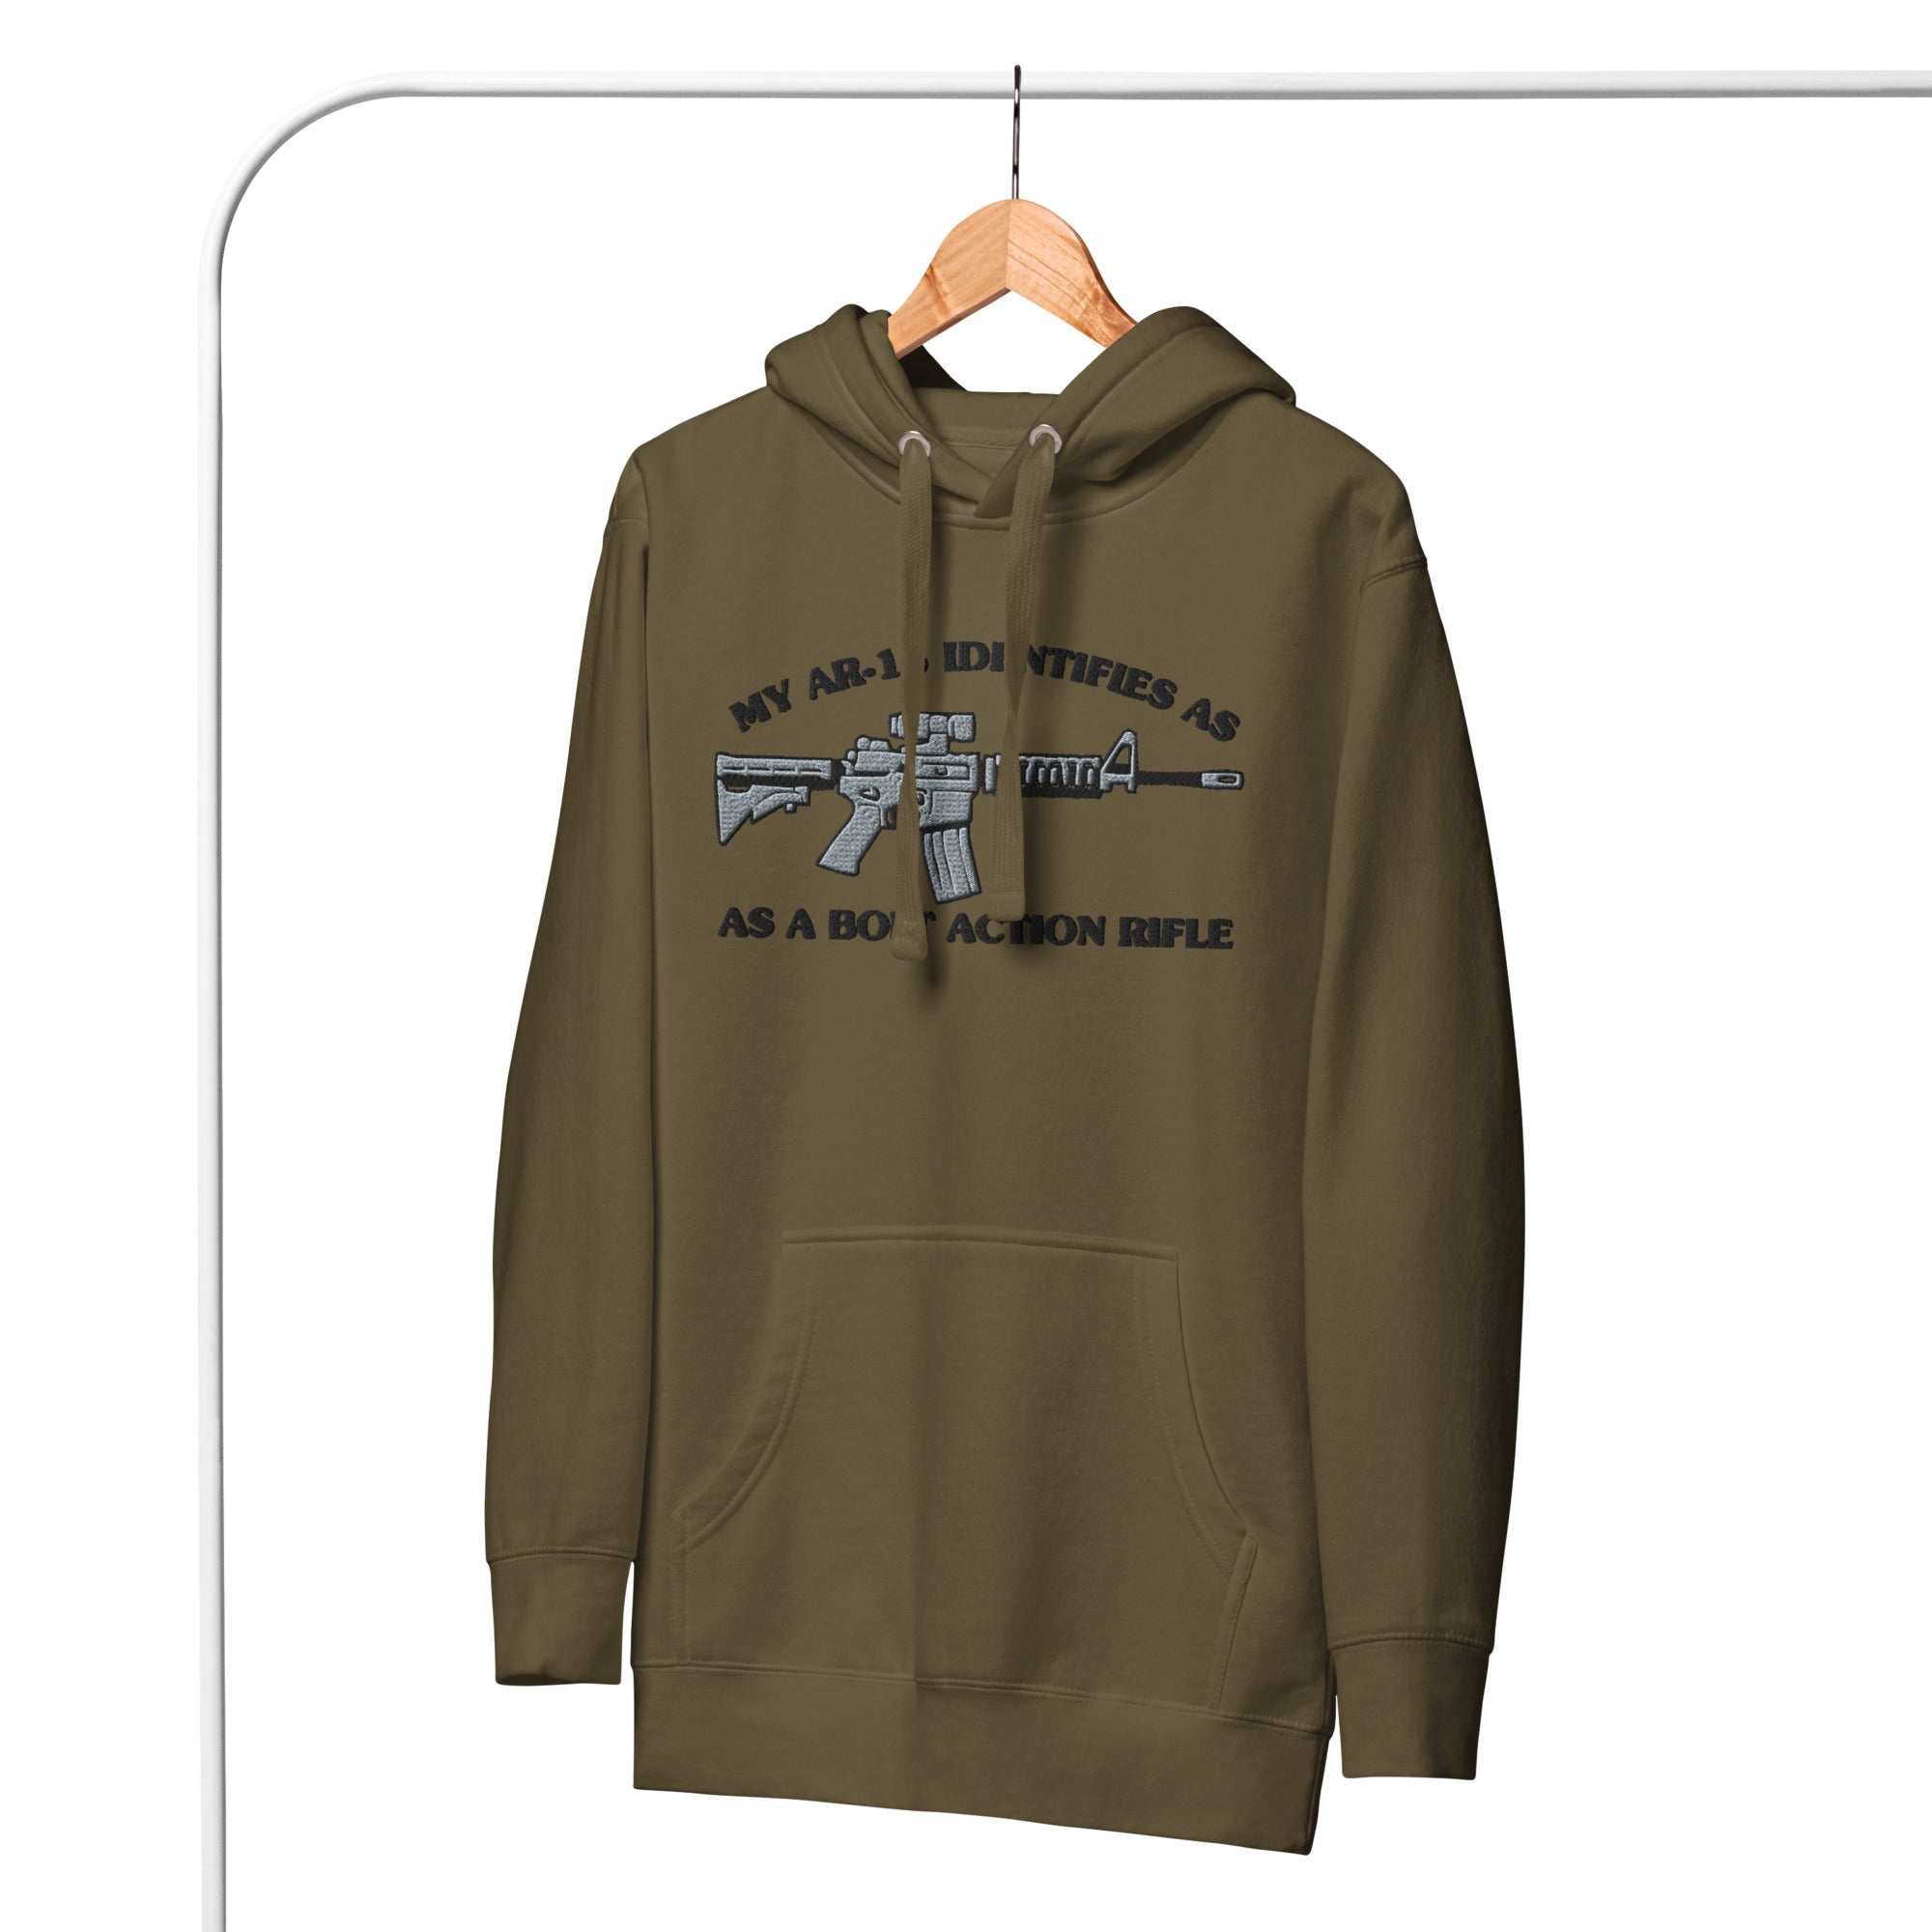 My AR-15 Identifies as a Bolt Action Rifle Embroidered Hoodie